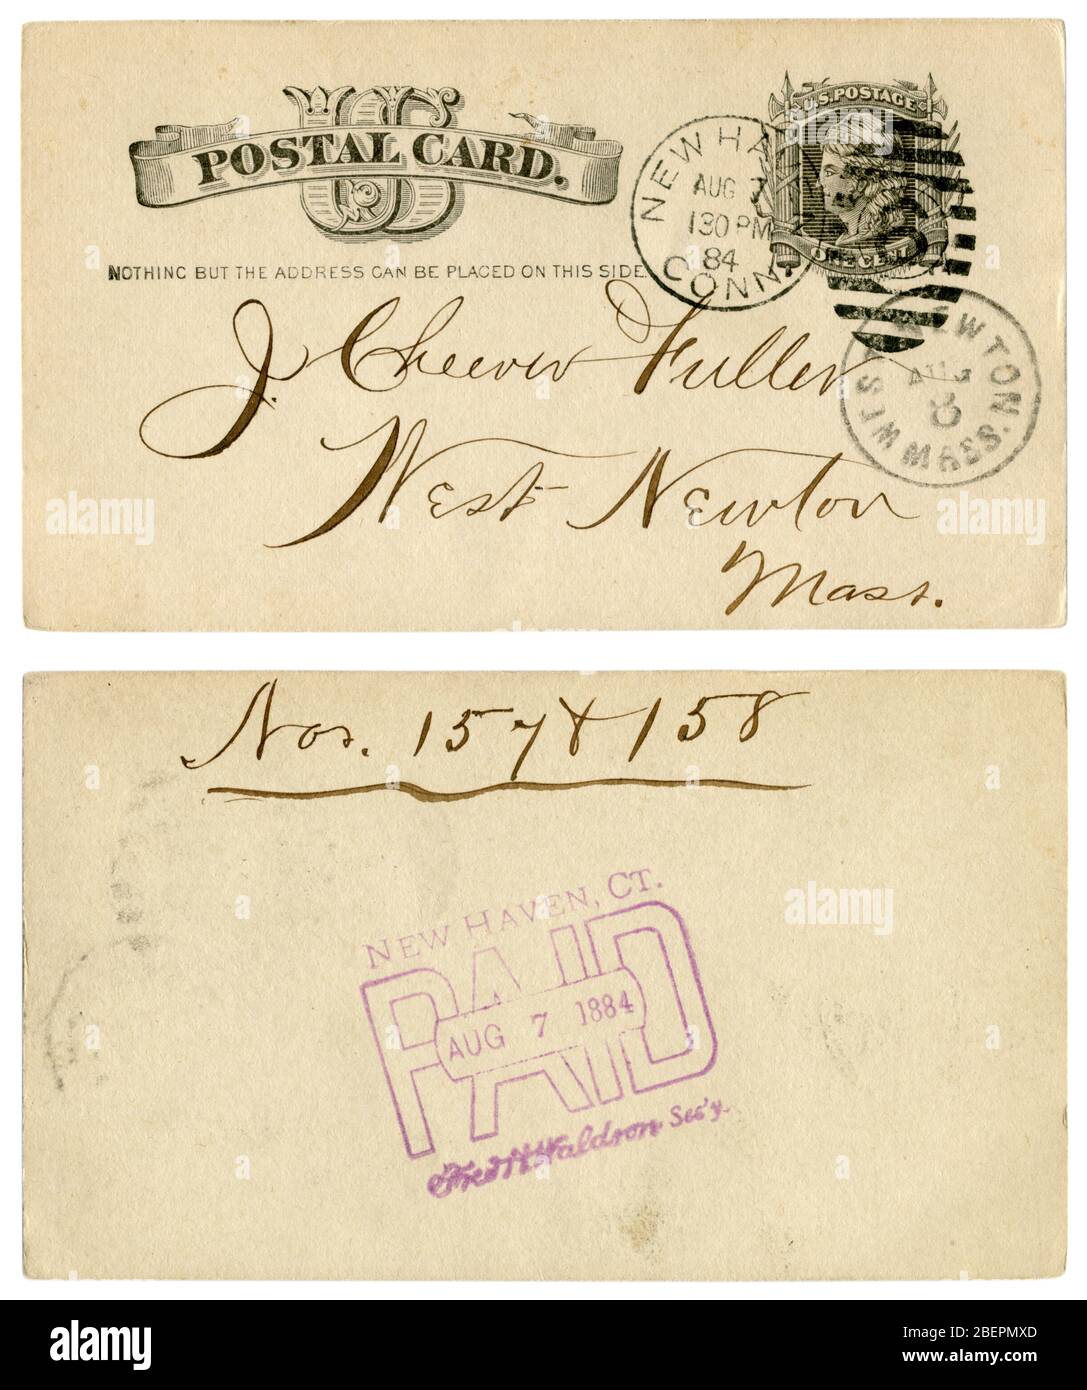 New Haven, Connecticut, West Newton, Massachusetts, The USA - 7-8 August 1884: US historical Post Card with black text in vignette, Imprinted One Cent Stock Photo